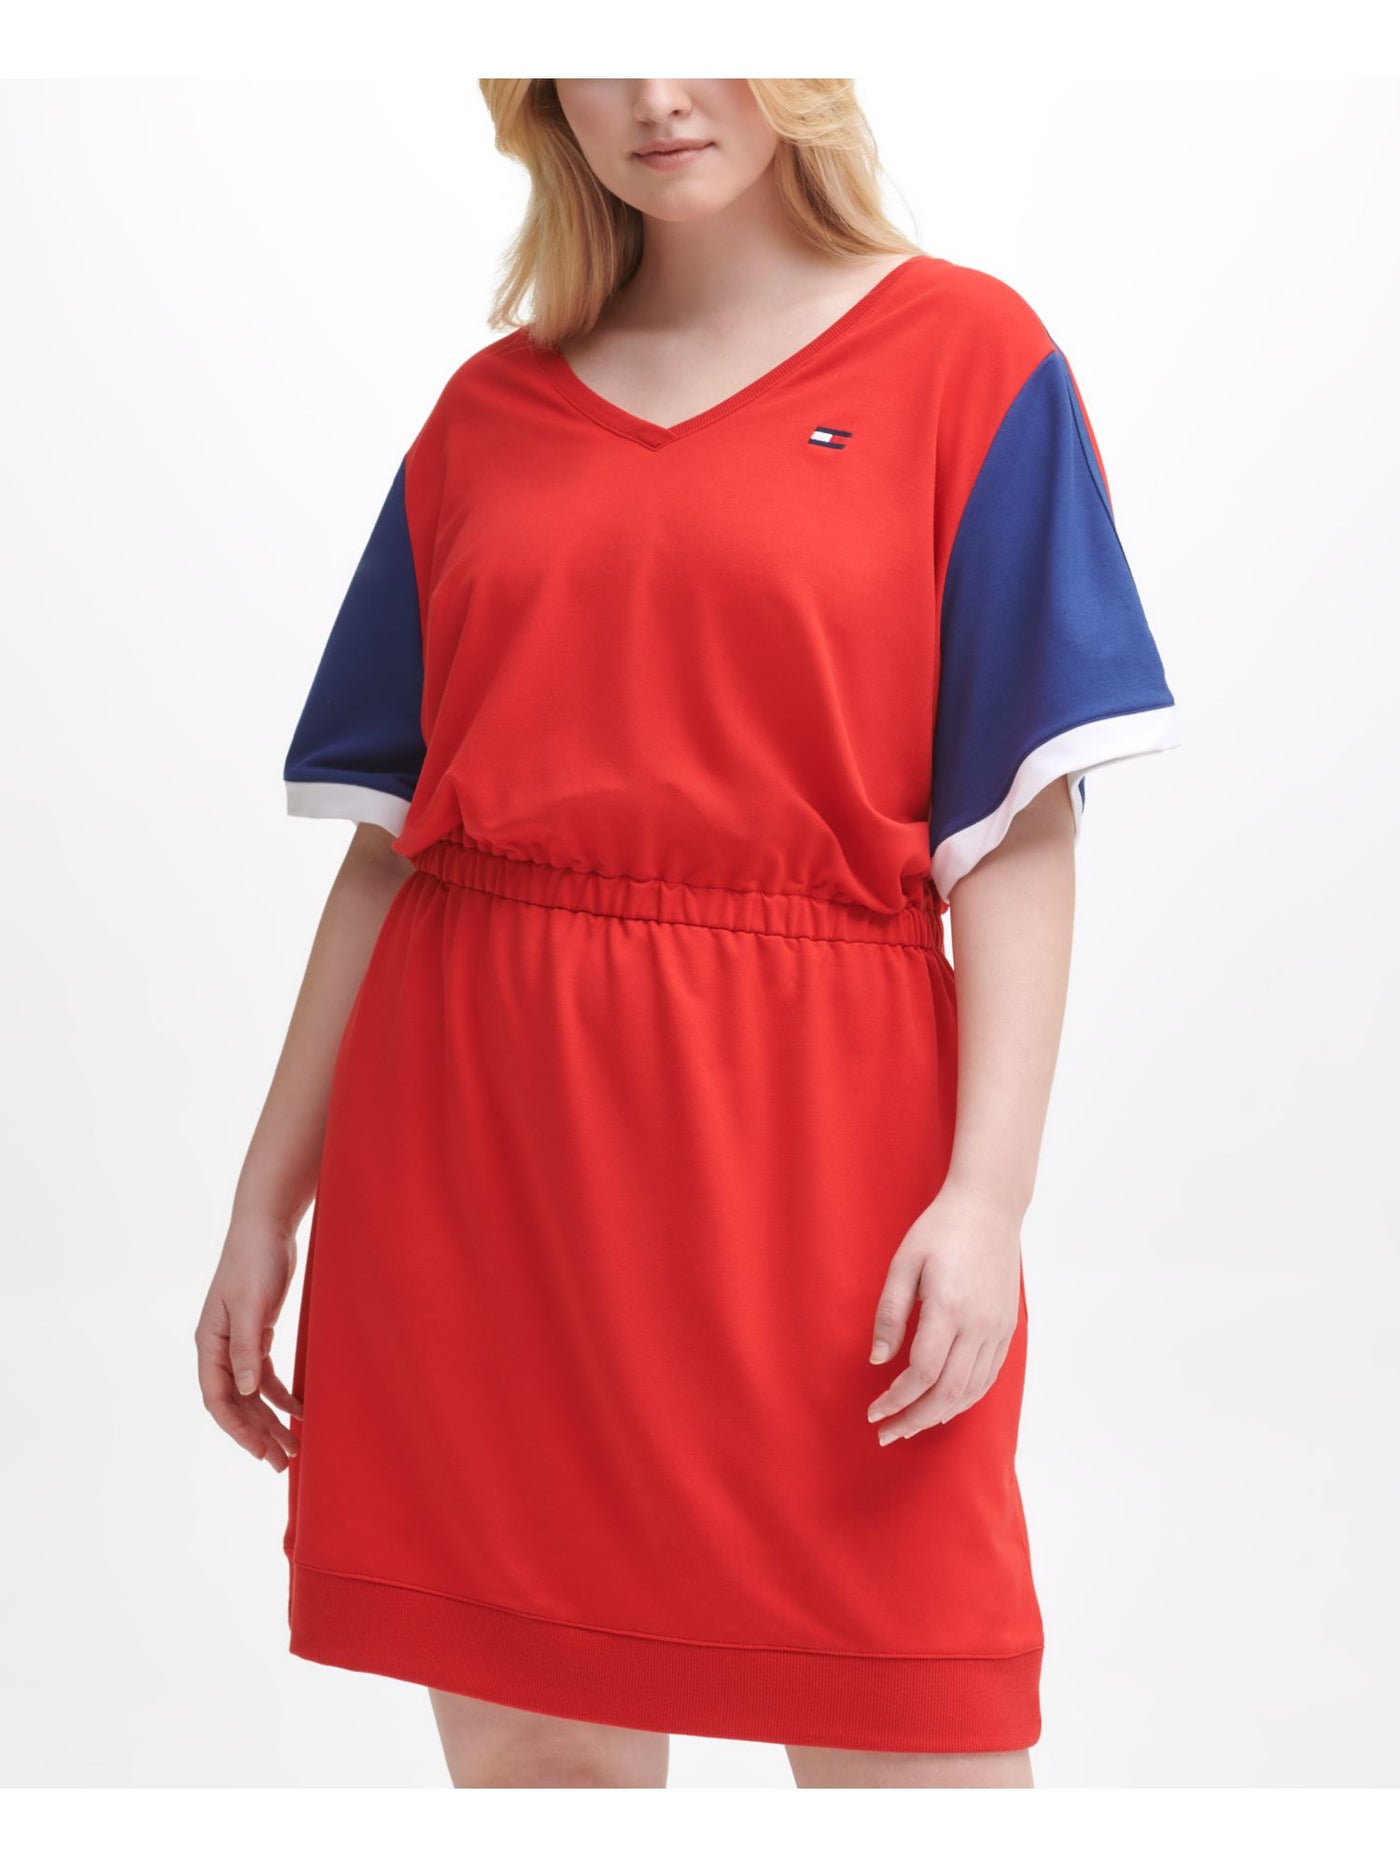 TOMMY HILFIGER SPORT Womens Red Ribbed Elastic Waist Color Block Elbow Sleeve V Neck Above The Knee Shirt Dress Plus 3X